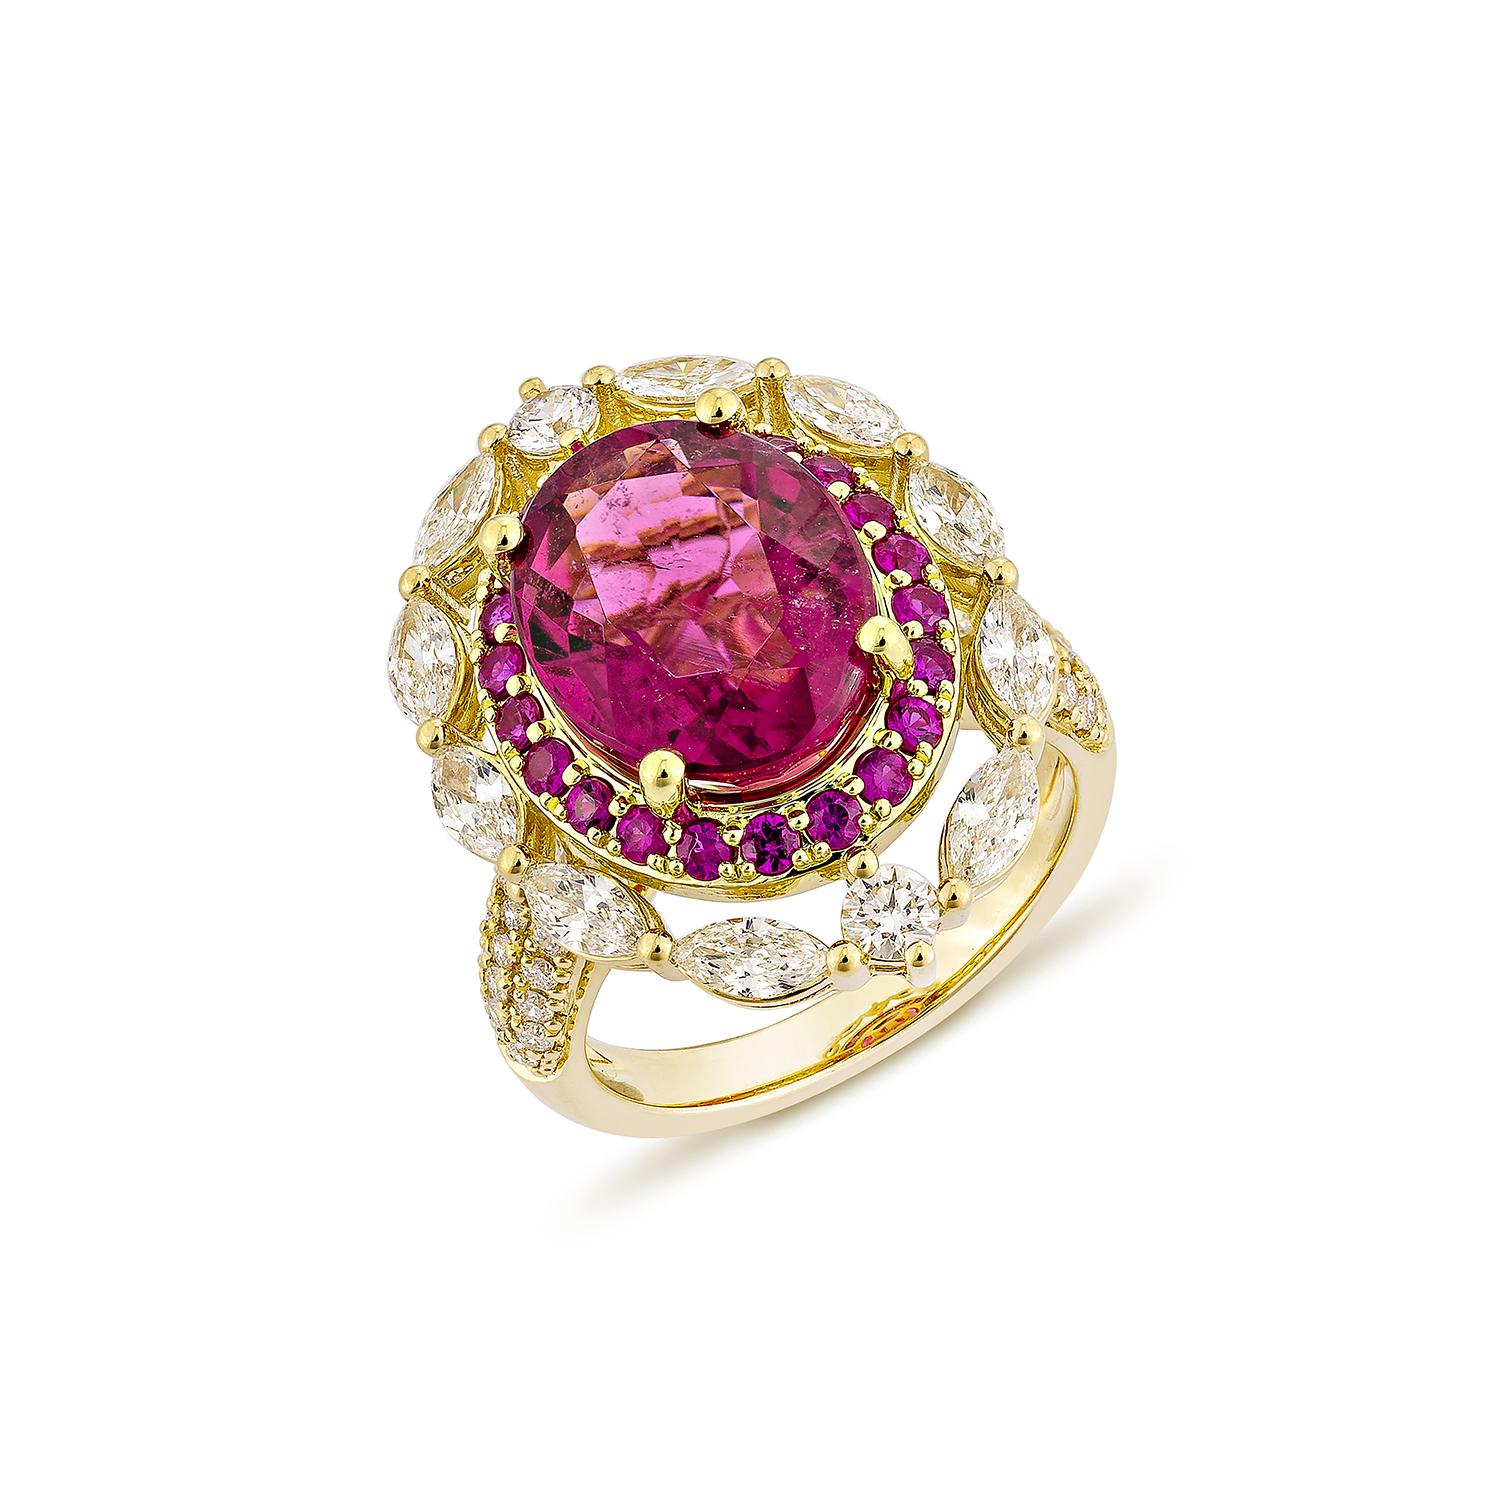 Contemporary 5.70 Carat Rubellite Cocktail Ring in 18Karat Yellow Gold with Ruby and Diamond. For Sale